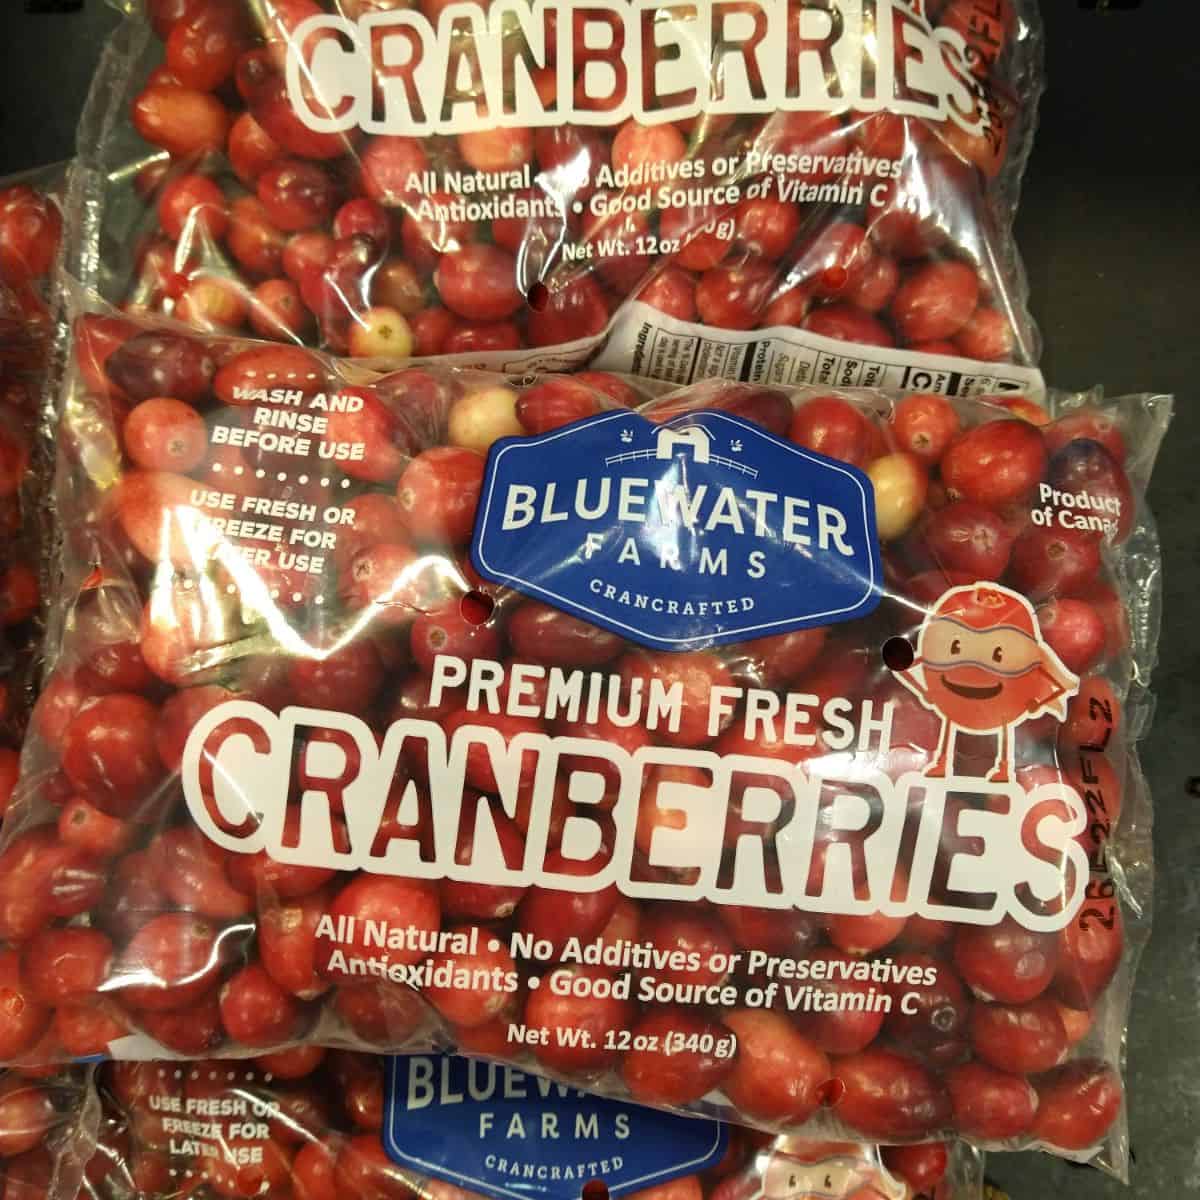 Bags of Bluewater Farms Cranberries at the grocery store.